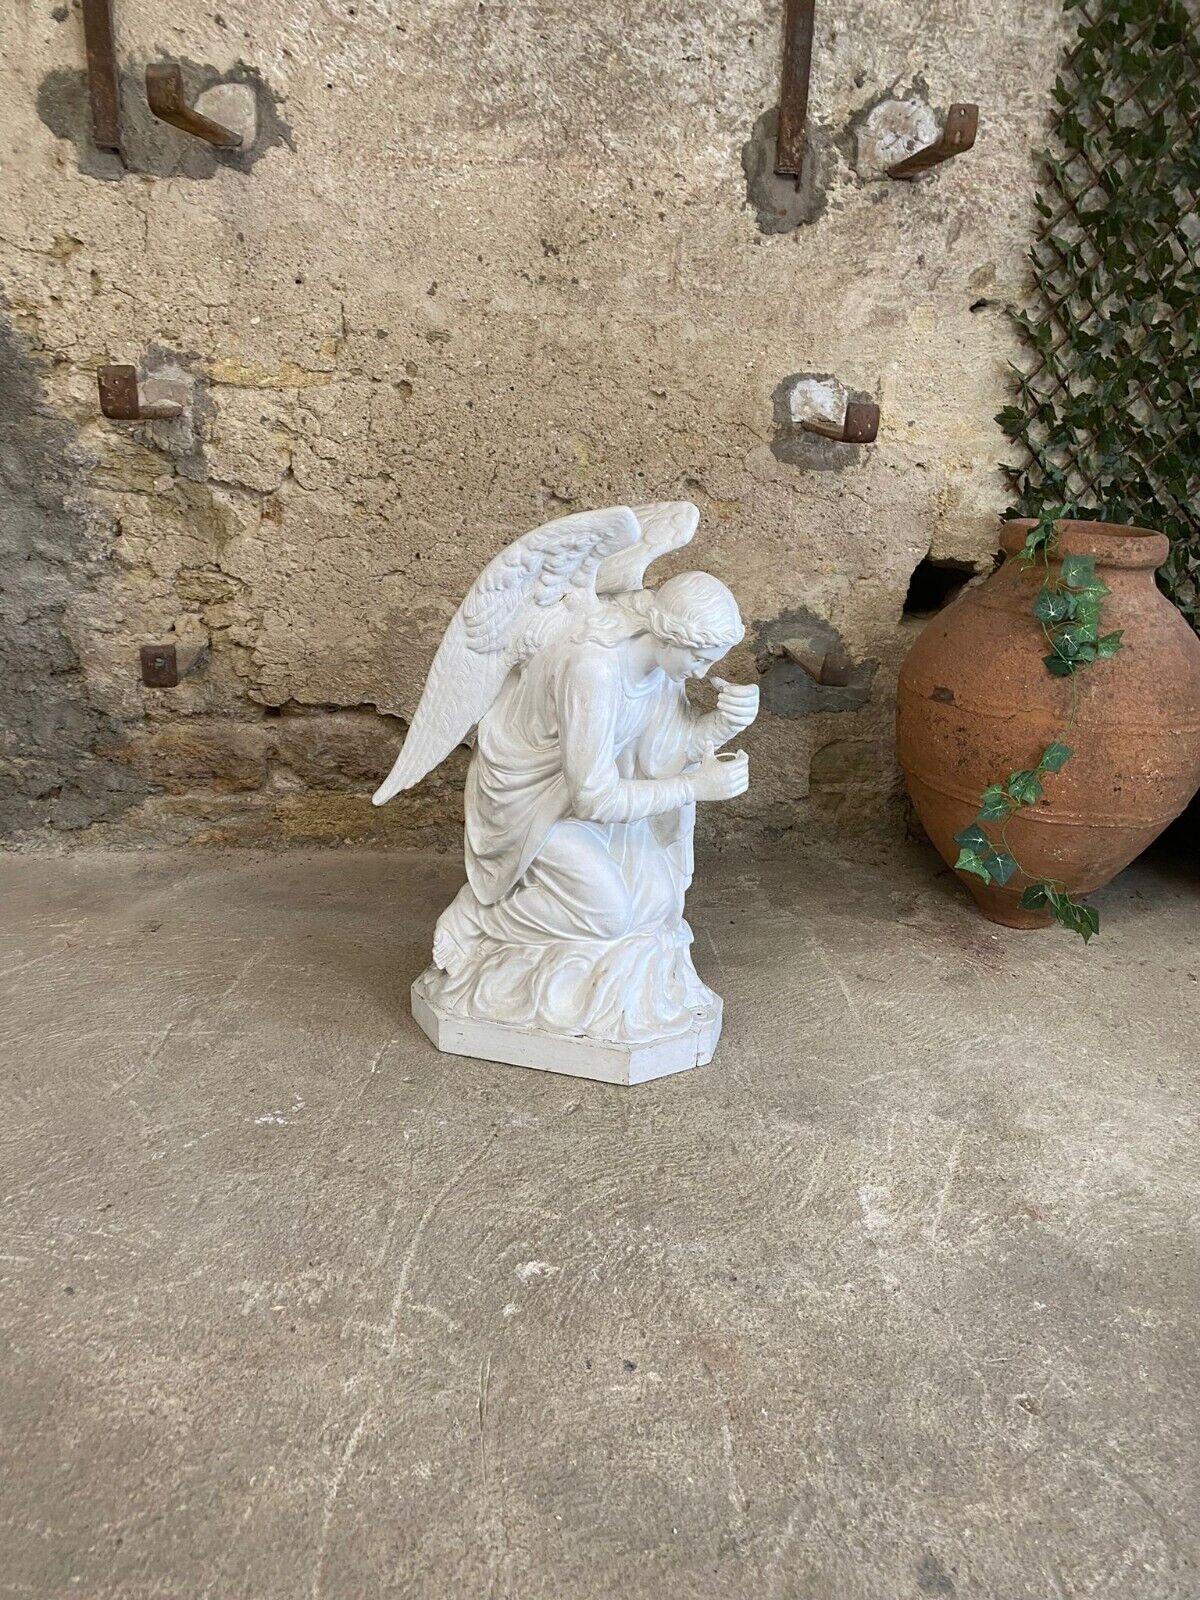 
This antique French plaster kneeling statue is from a Parisian Church, it features a stunning horse hair plaster sculpture of a female angel figure. The intricate details and exquisite craftsmanship make it a truly unique piece for any collector or